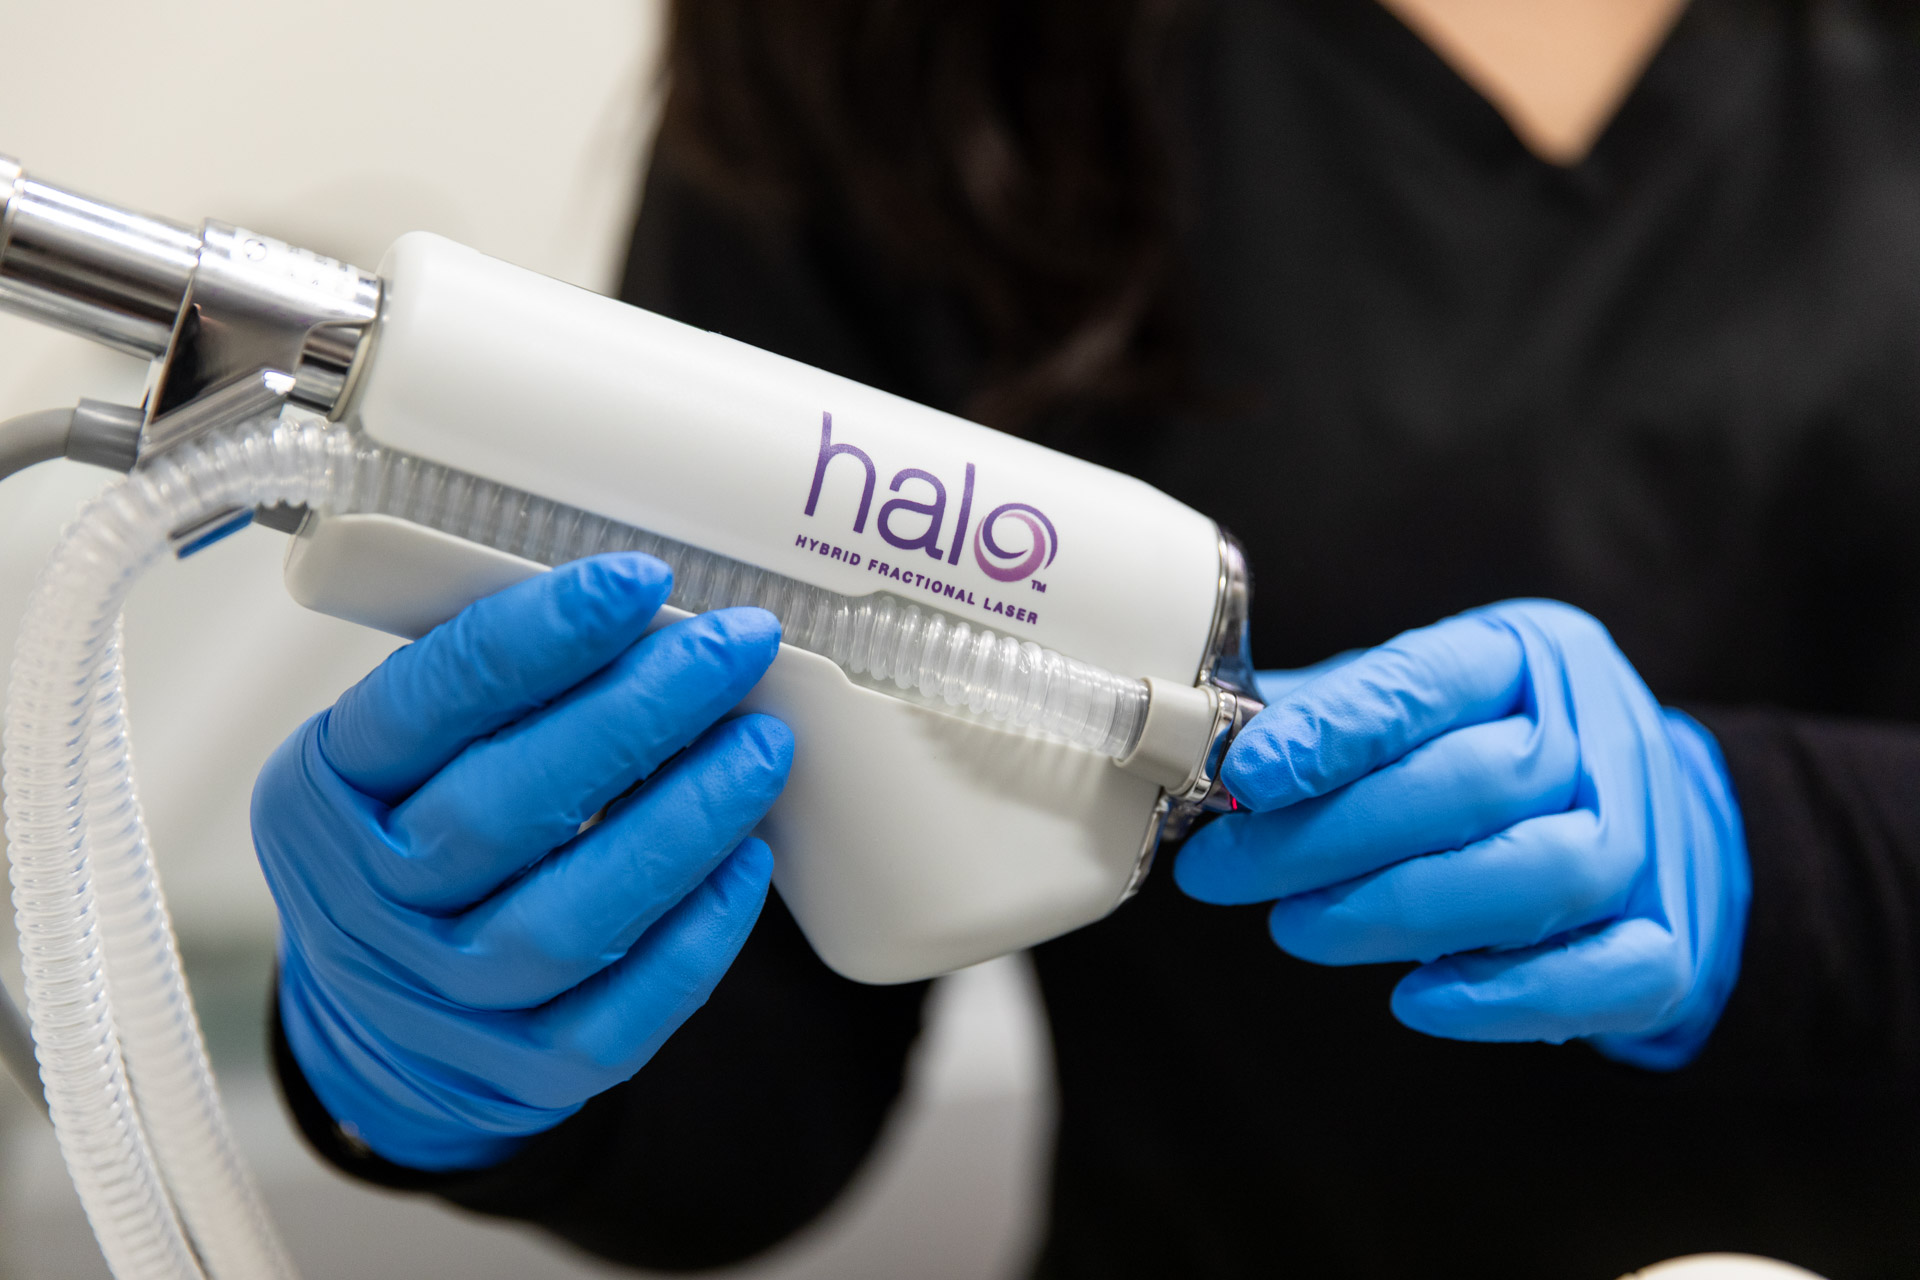 close up picture of halo laser treatment device